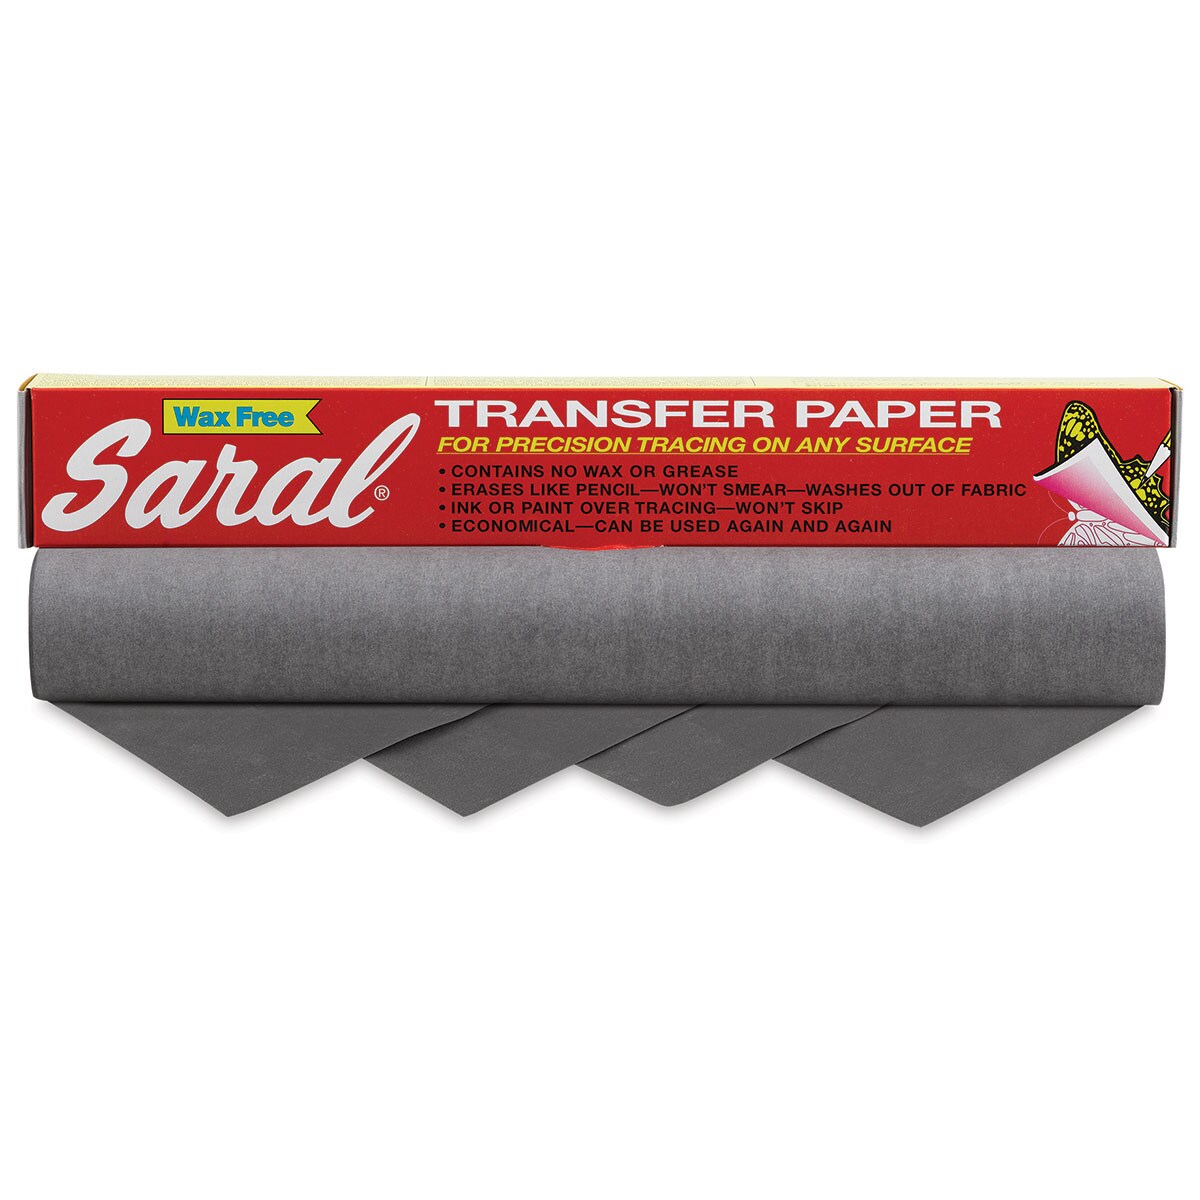 Saral Wax Free Transfer Paper - Graphite